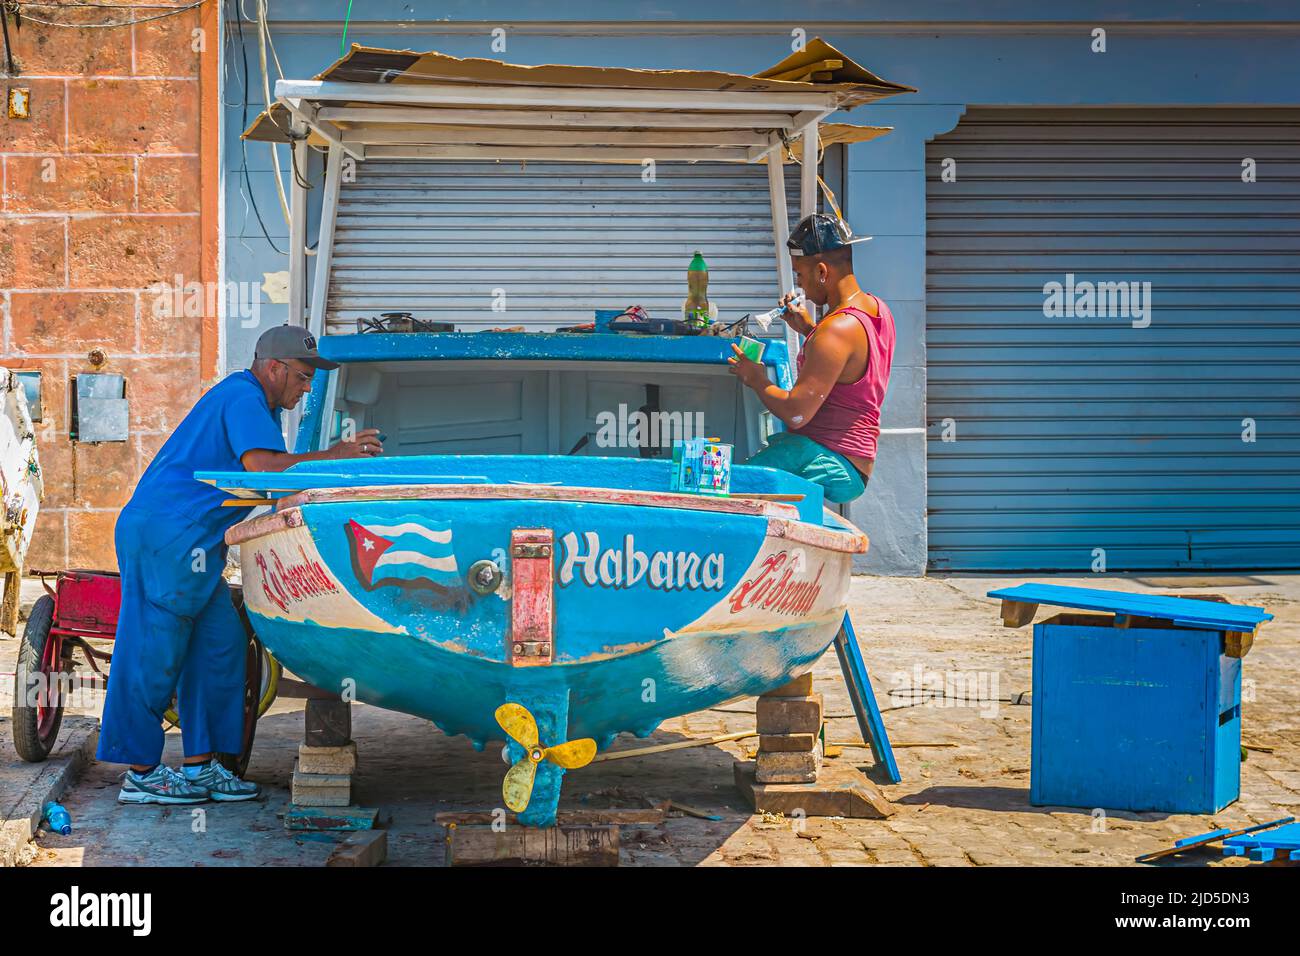 Two men paint a small blue boat in the streets of Old Havana, Cuba Stock Photo